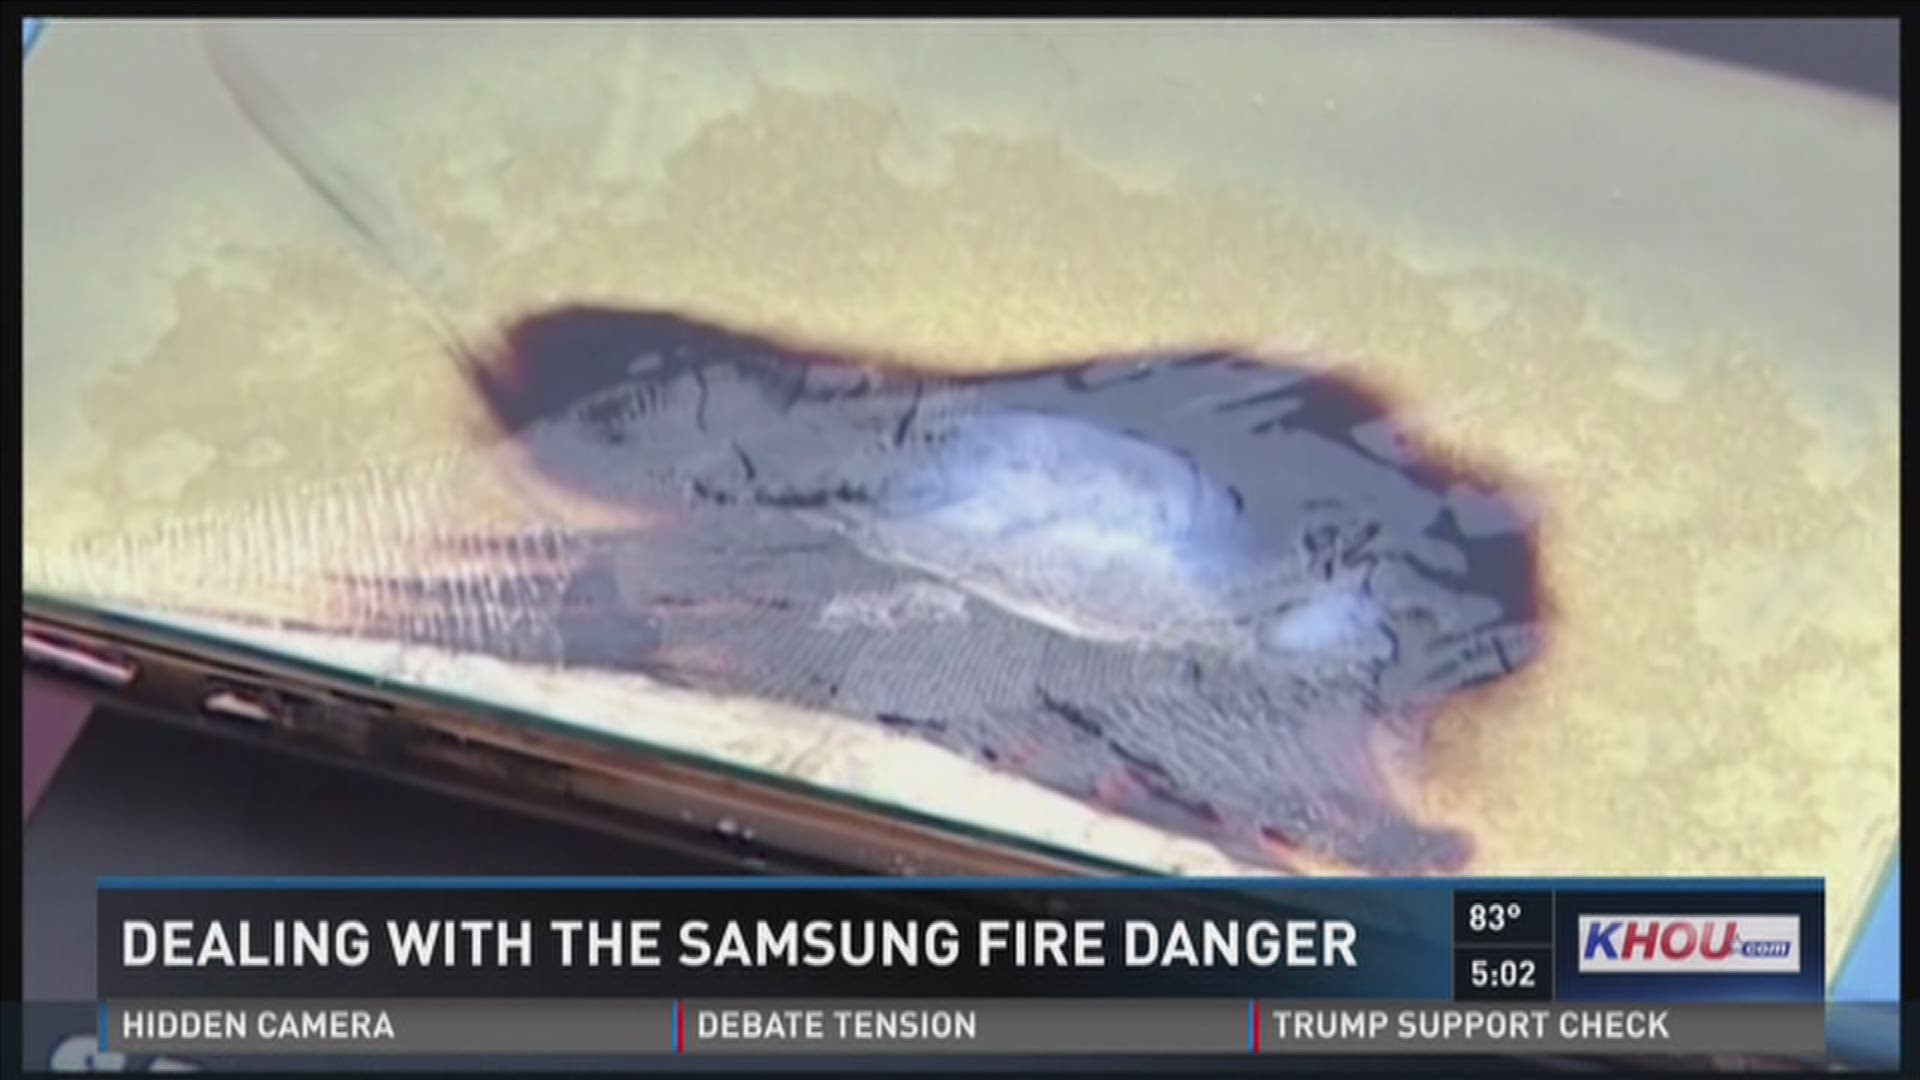 A Houston man's burning cell phone is at the center of the Samsung investigation.